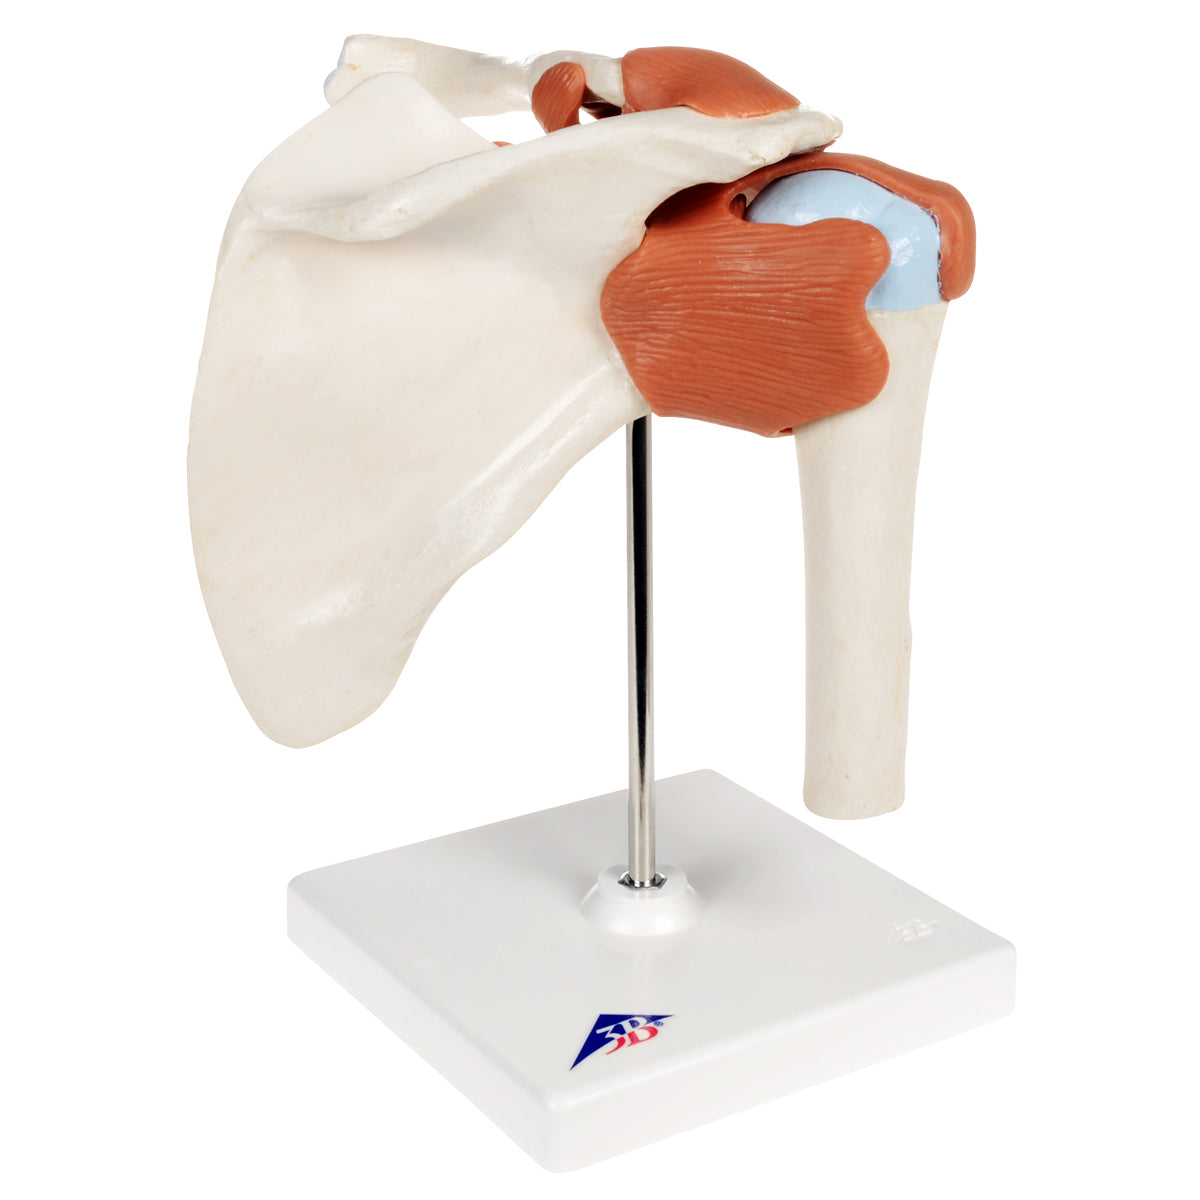 Flexible shoulder model with ligaments and colored joint surfaces